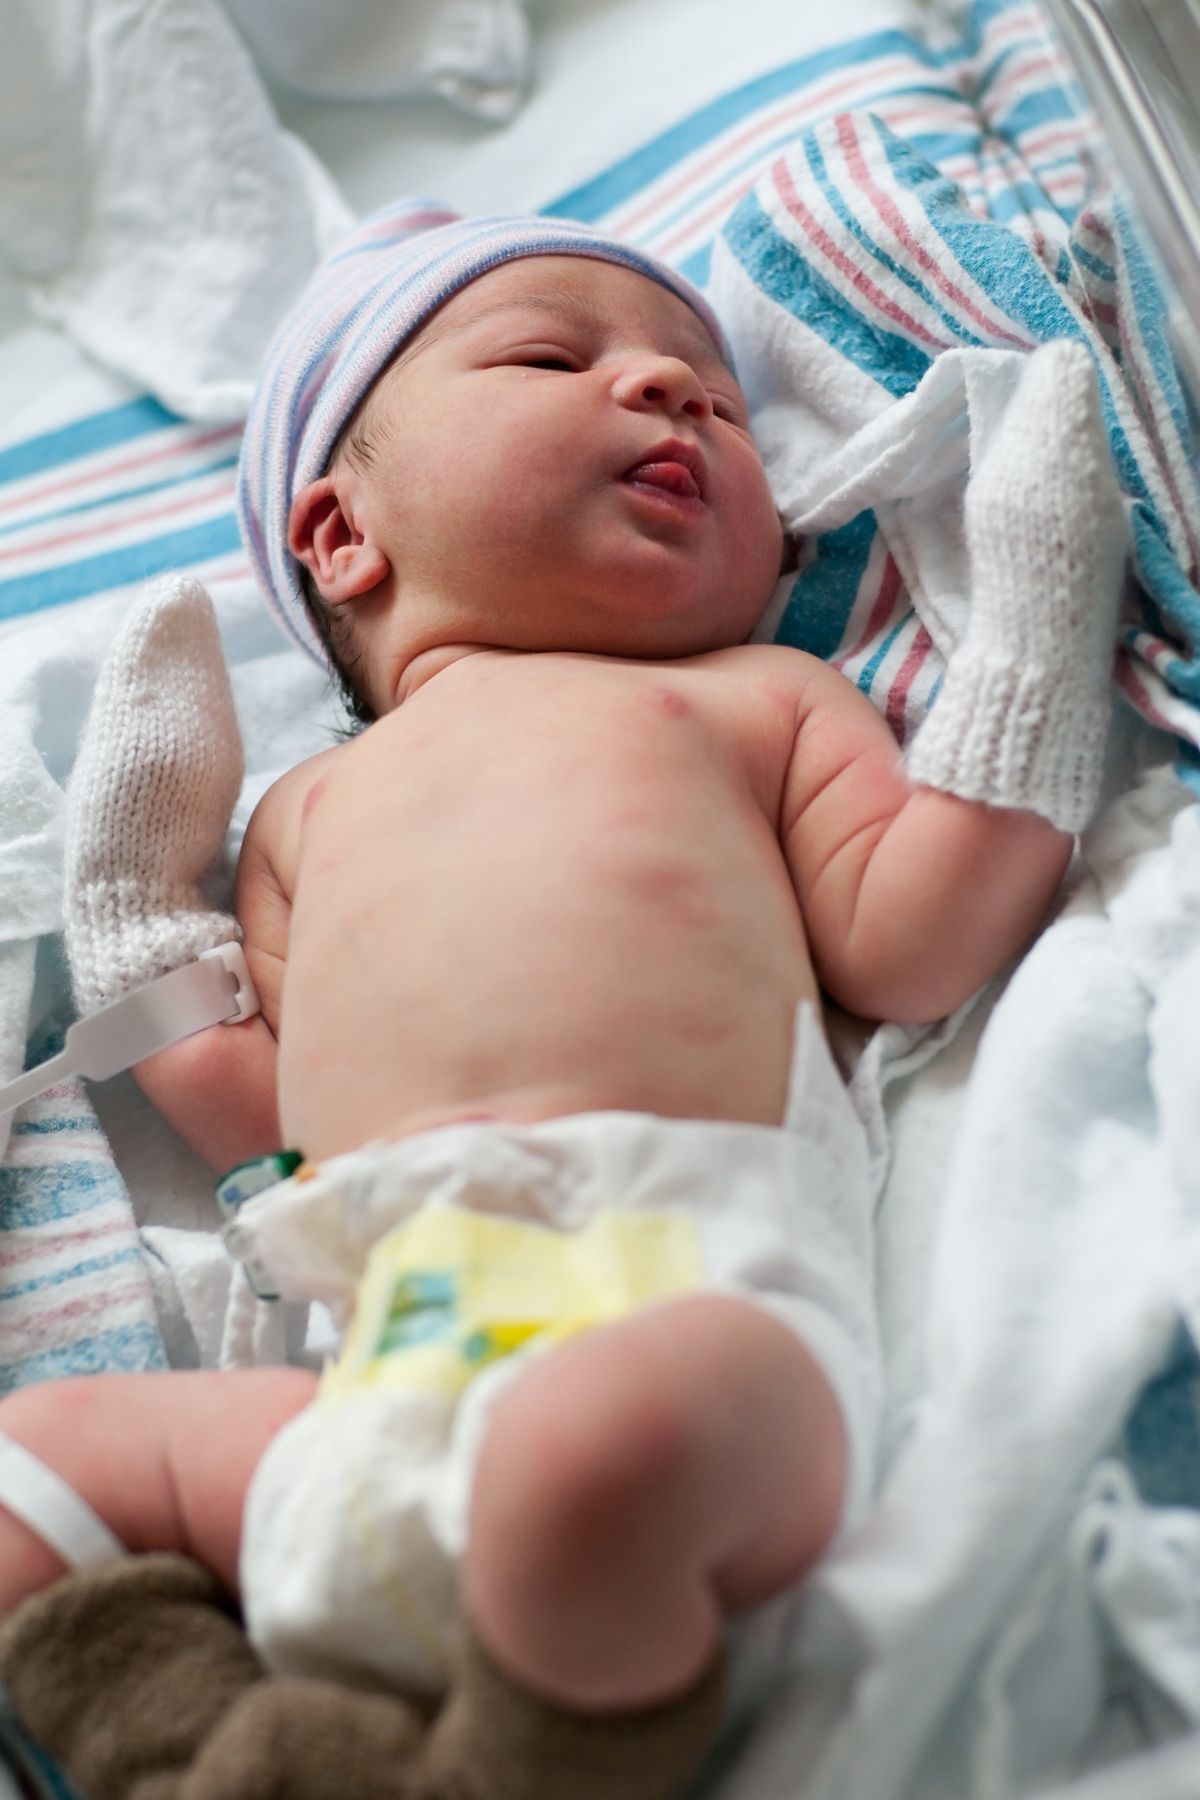 Newborn baby lays on striped blanket in hospital bassinet with mittens on hands.